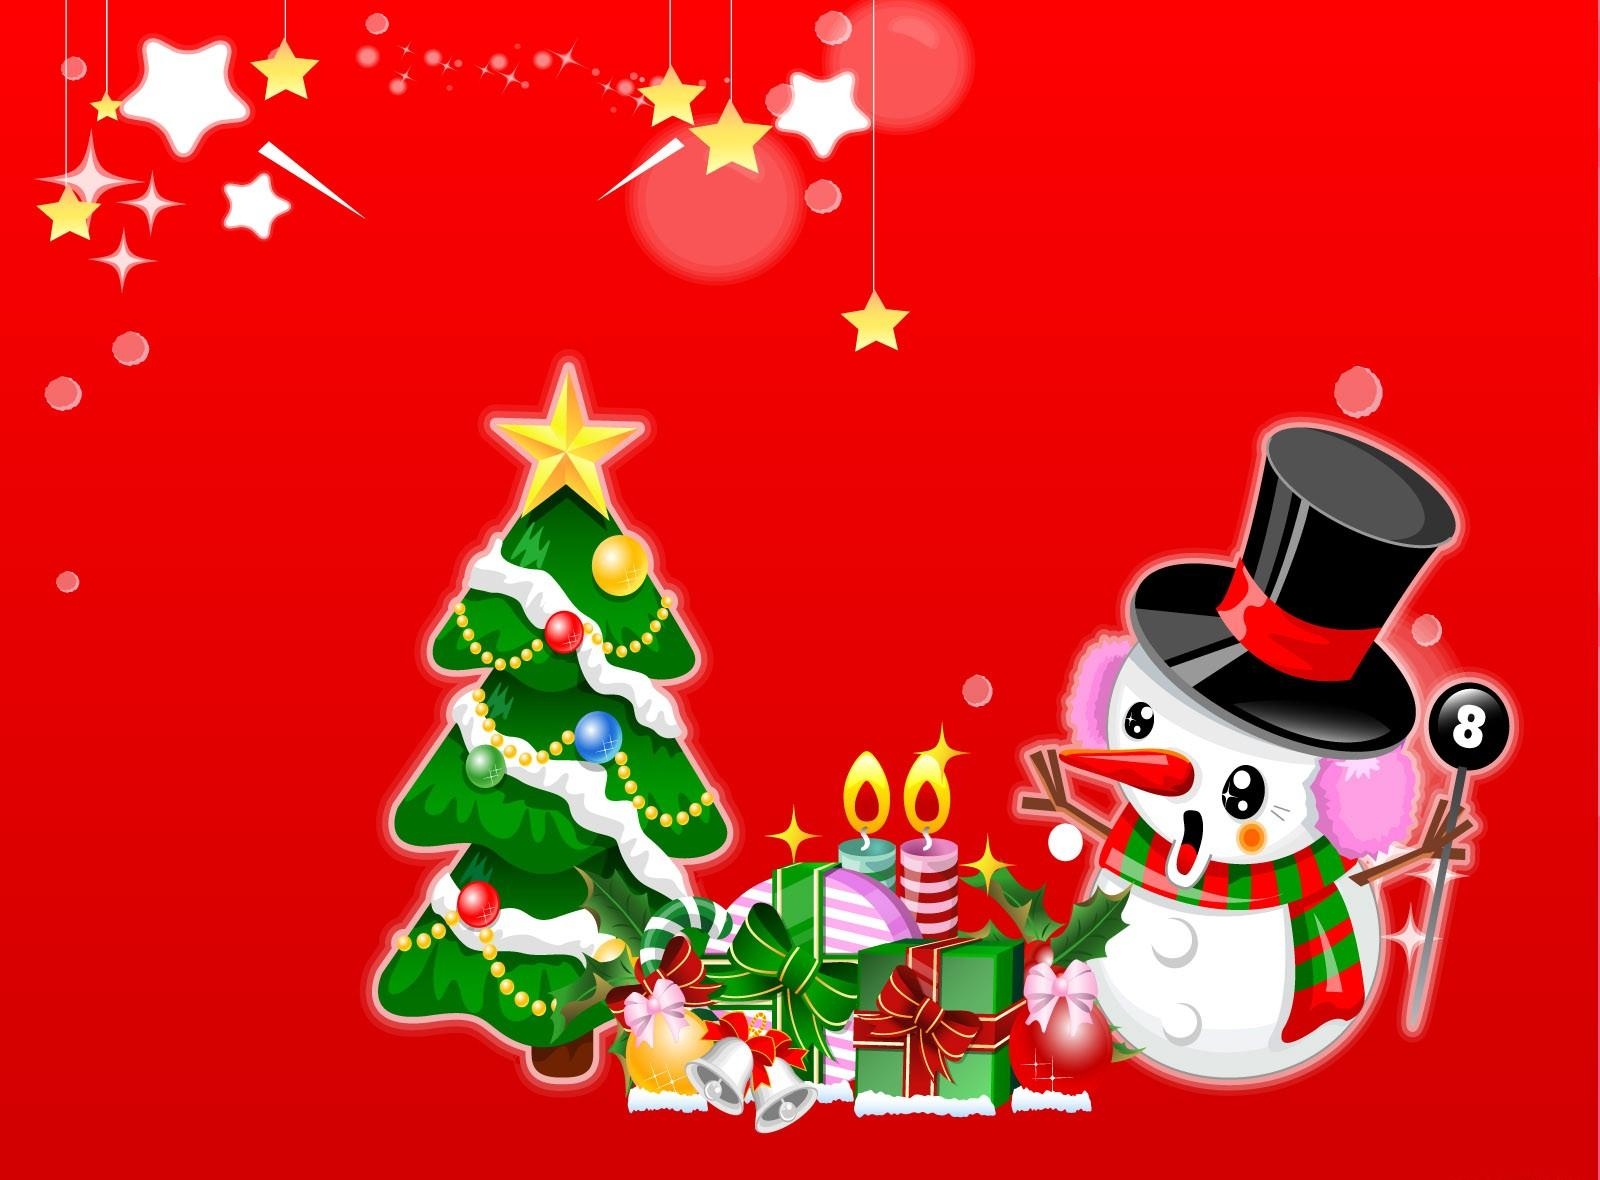 presents, holidays, stars, candles, snowman, christmas tree, surprise, astonishment, gifts